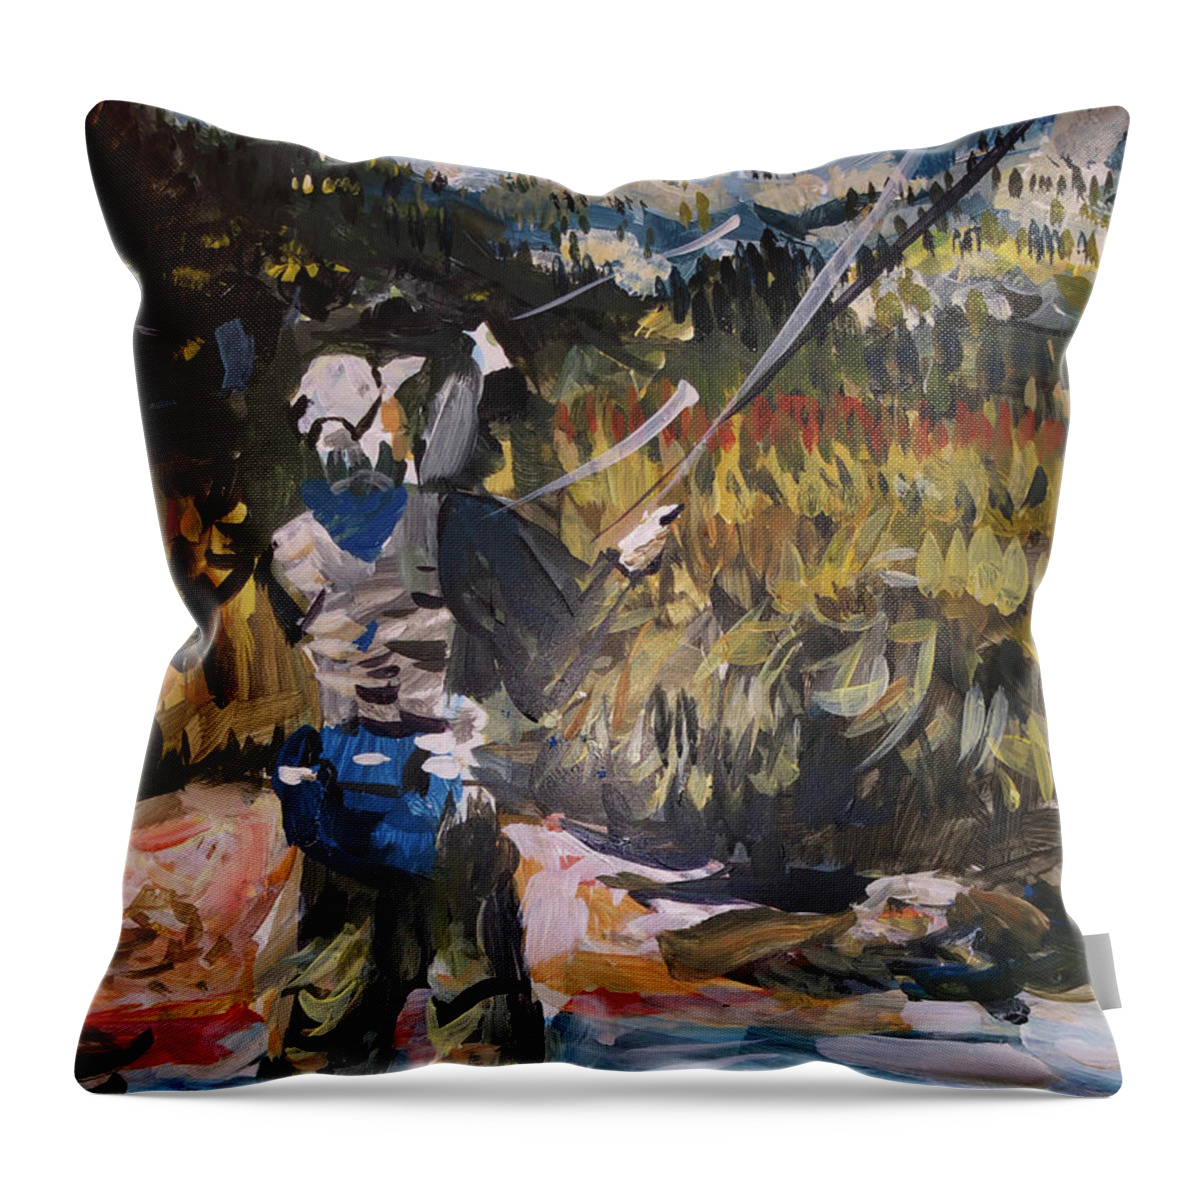 Fishing Throw Pillow featuring the painting Fishing Back Water by Joseph Mora